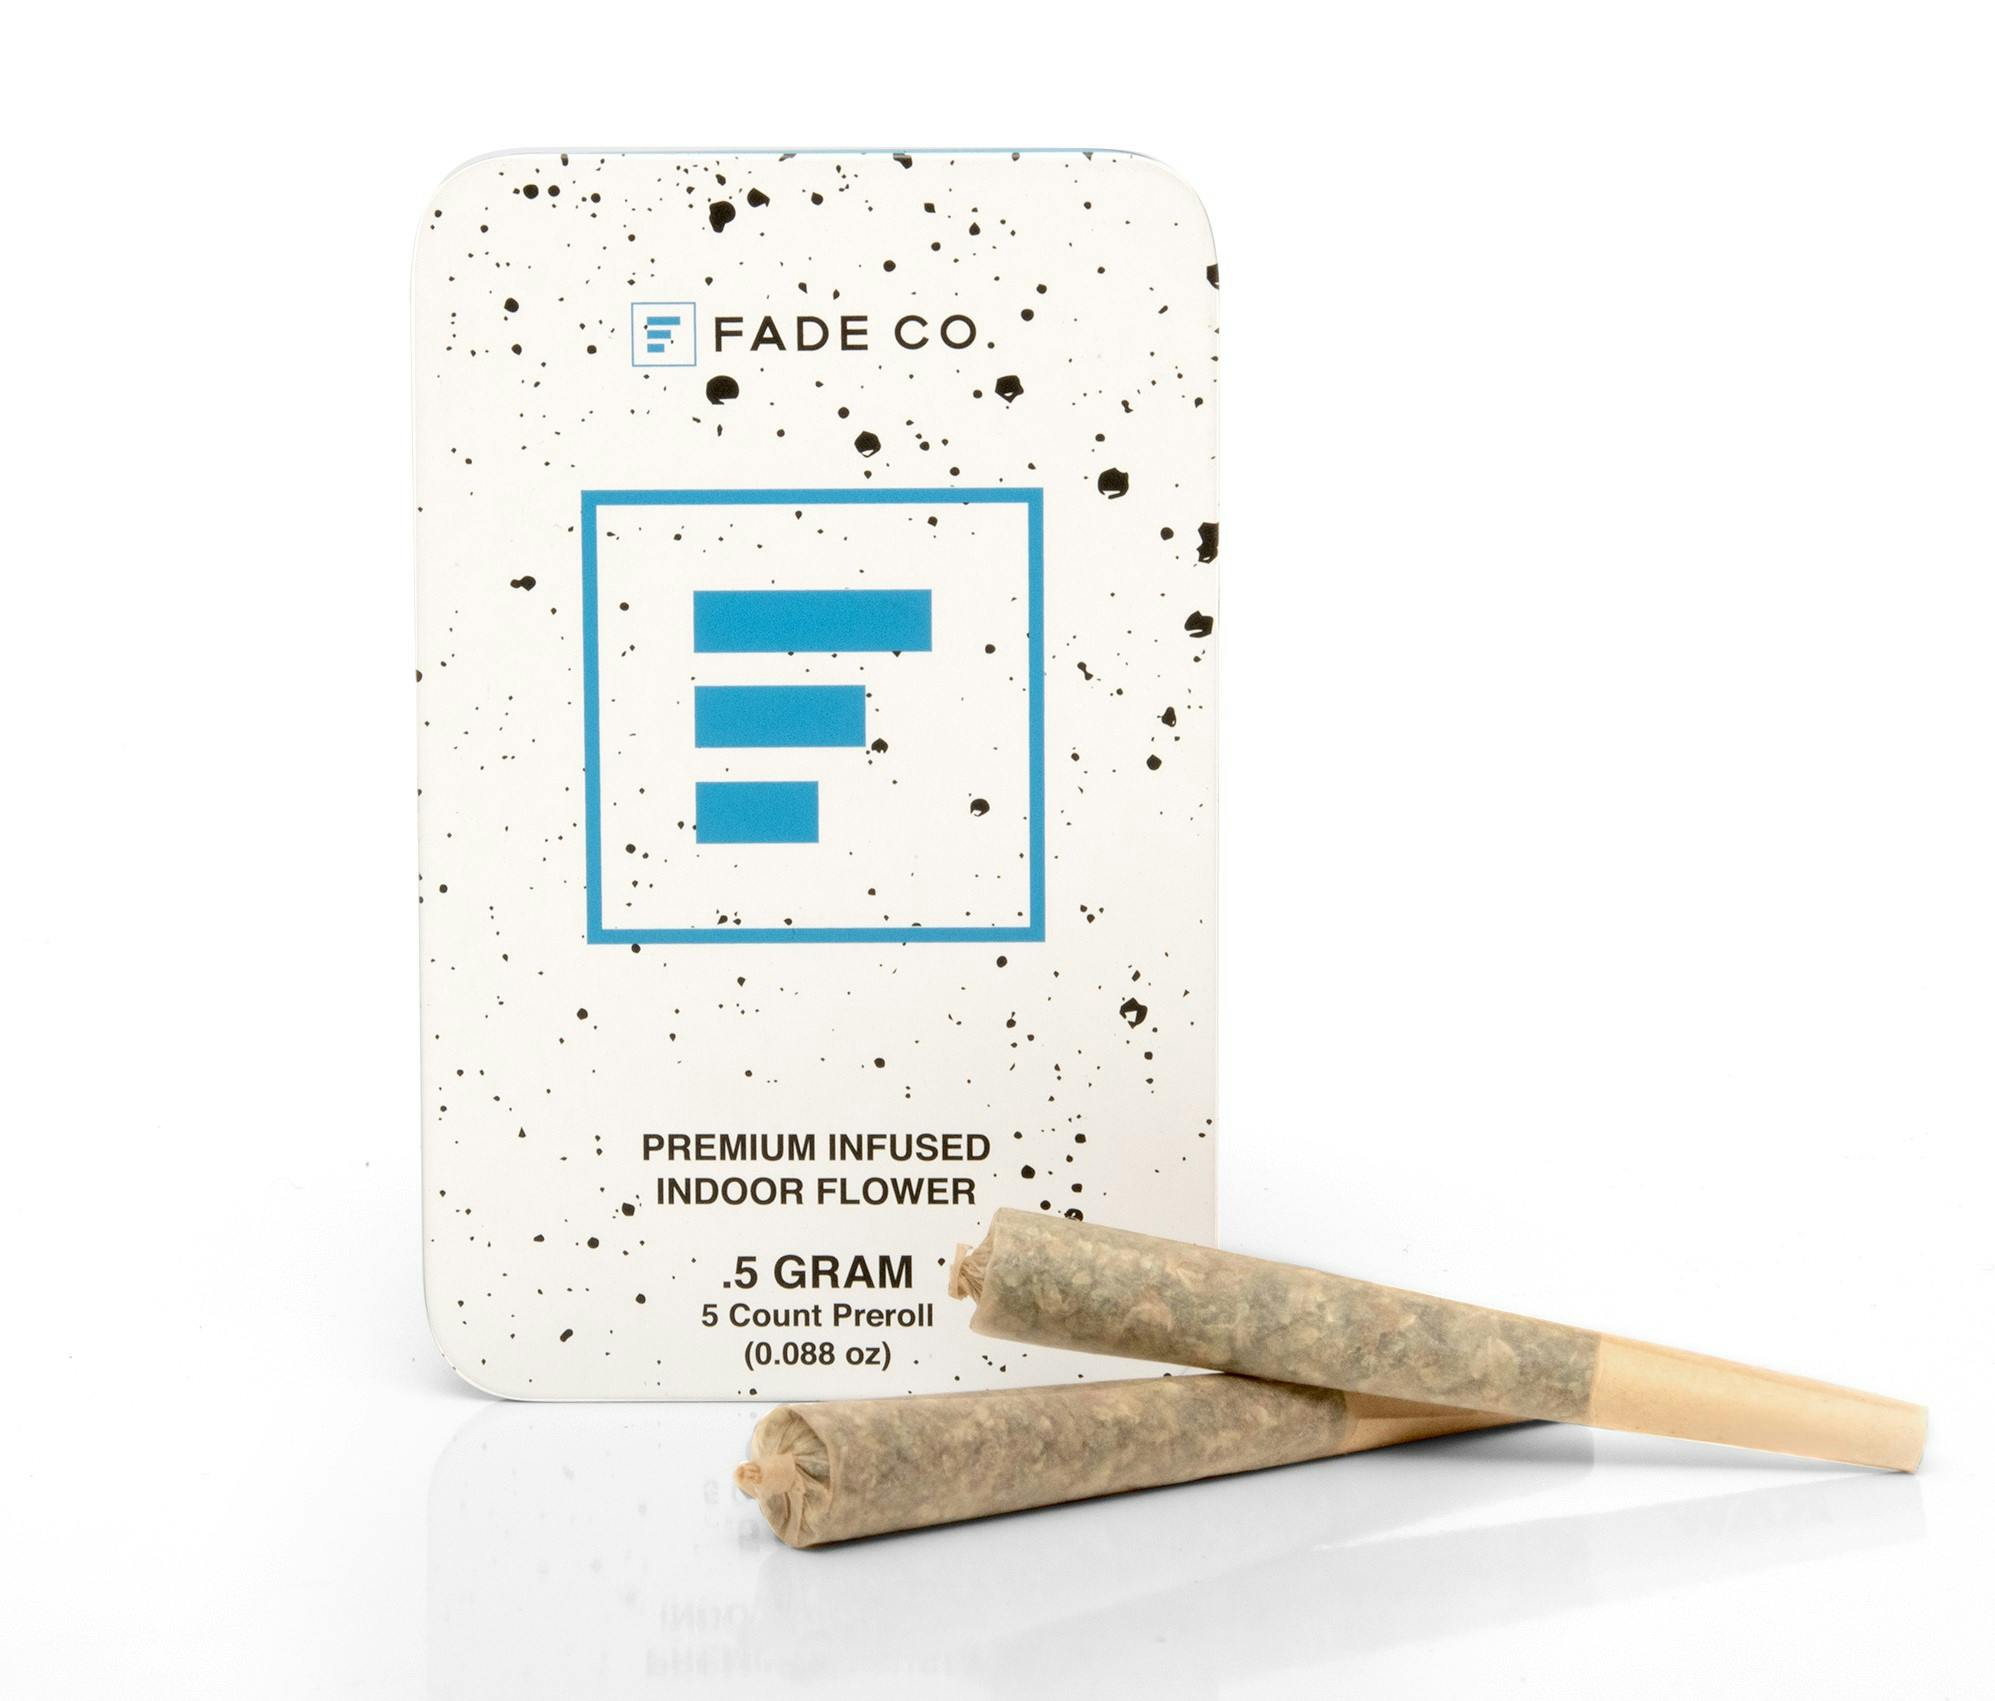 Tumble Infused Cannabis Pre-rolls